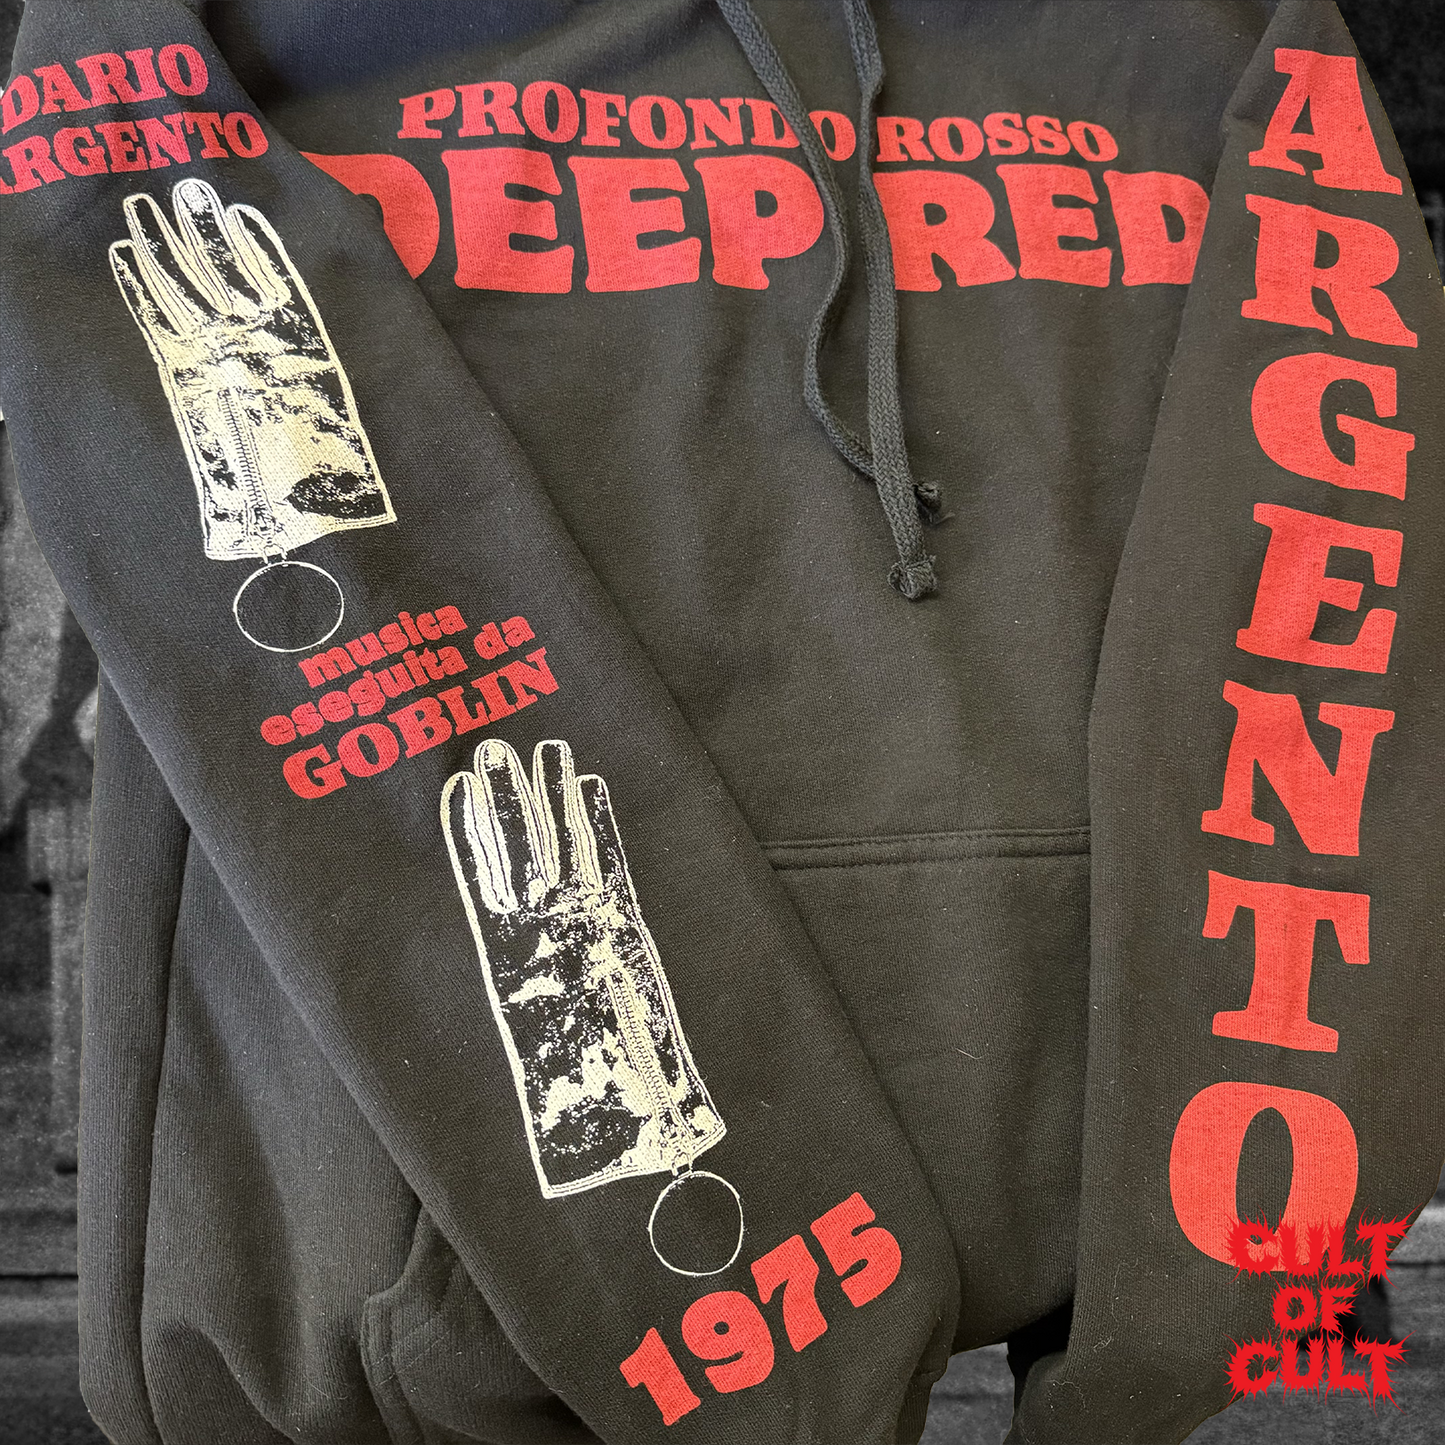 Detailed shot featuring the sleeves of the Deep Red Profondo Rosso hoodie.